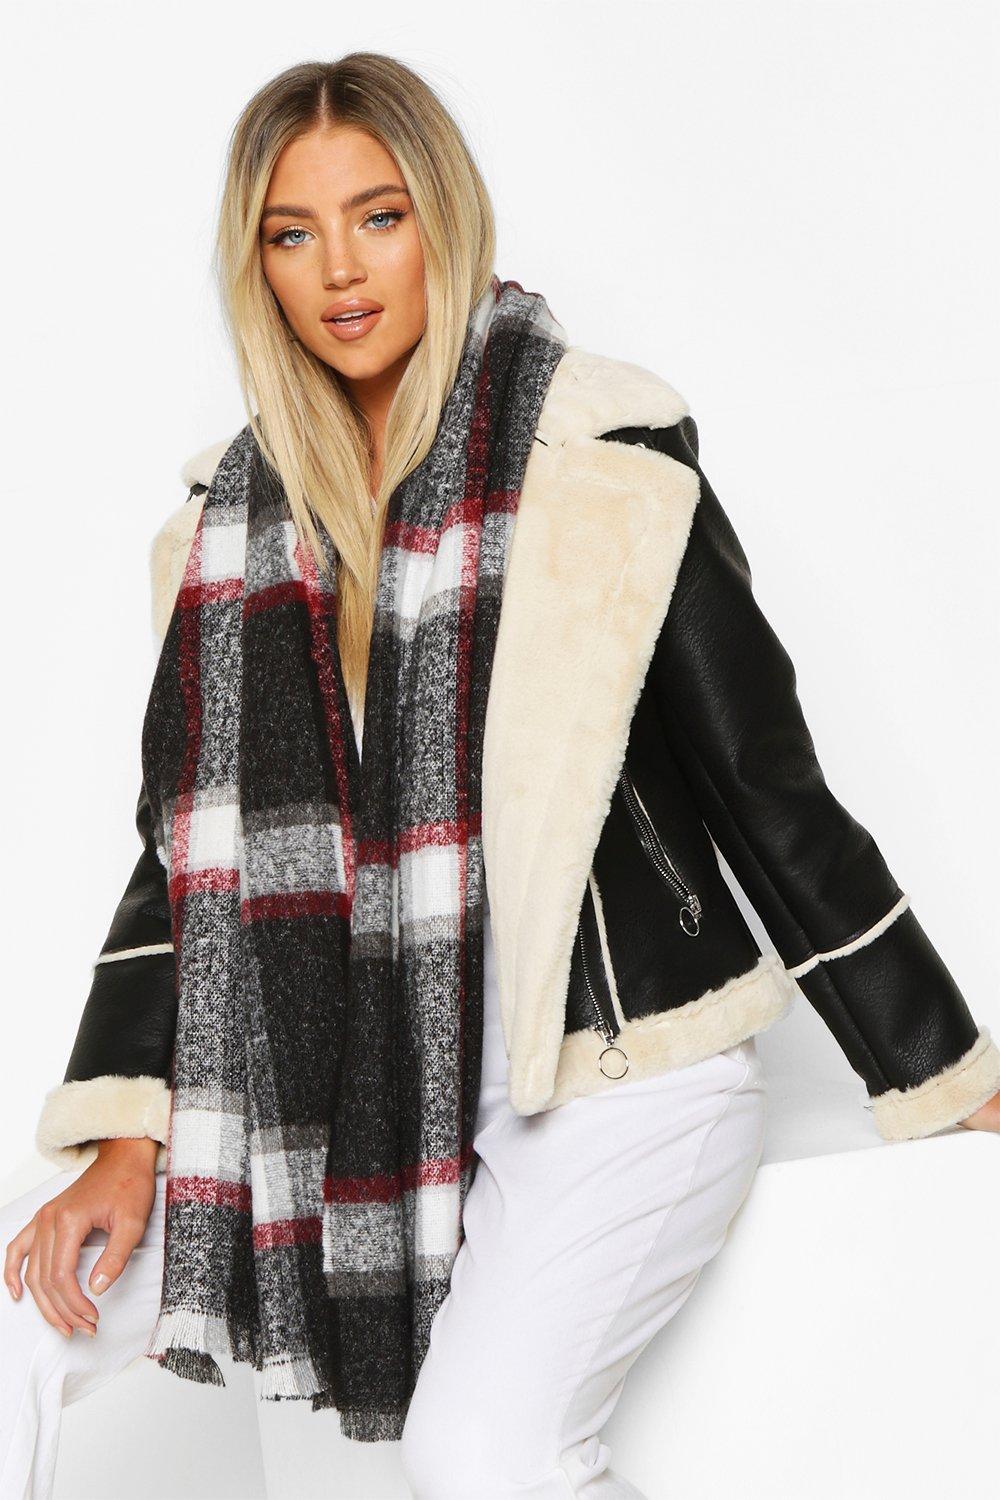 Boohoo Womens Check Patterned Scarf - Black - One Size